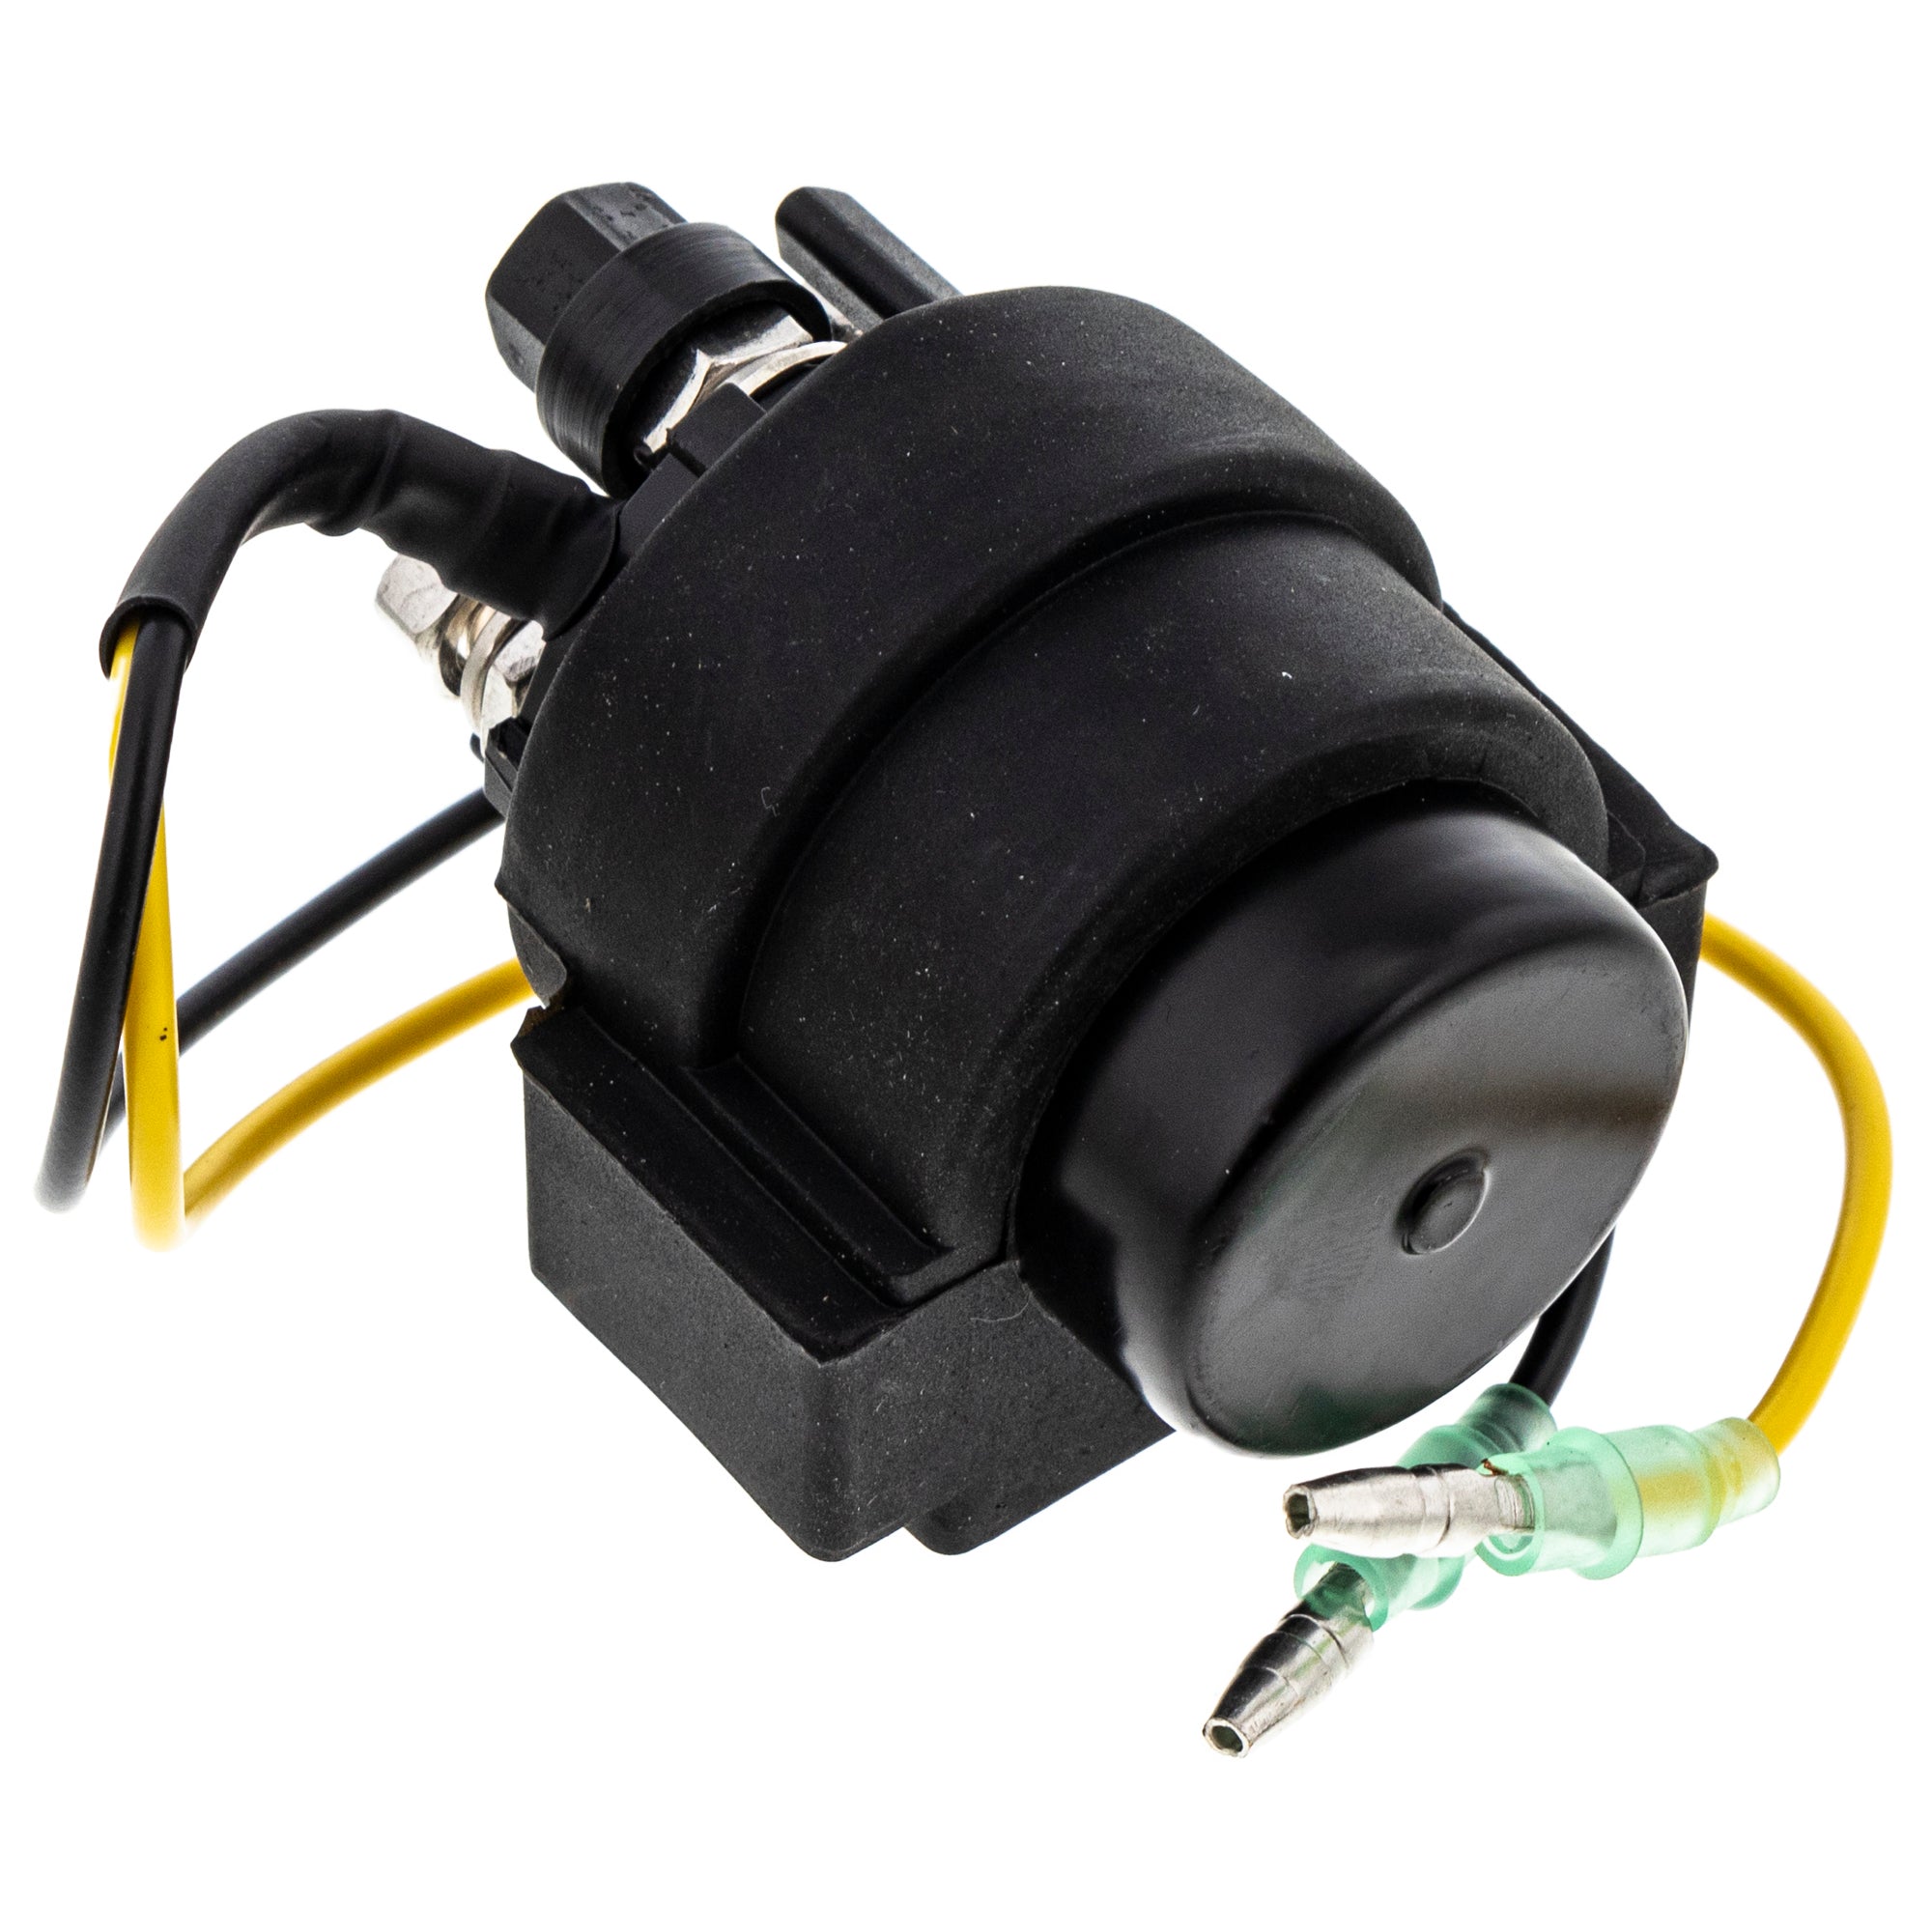 Starter Solenoid Relay Switch for Can-Am 710000344 Quest 500 Traxter